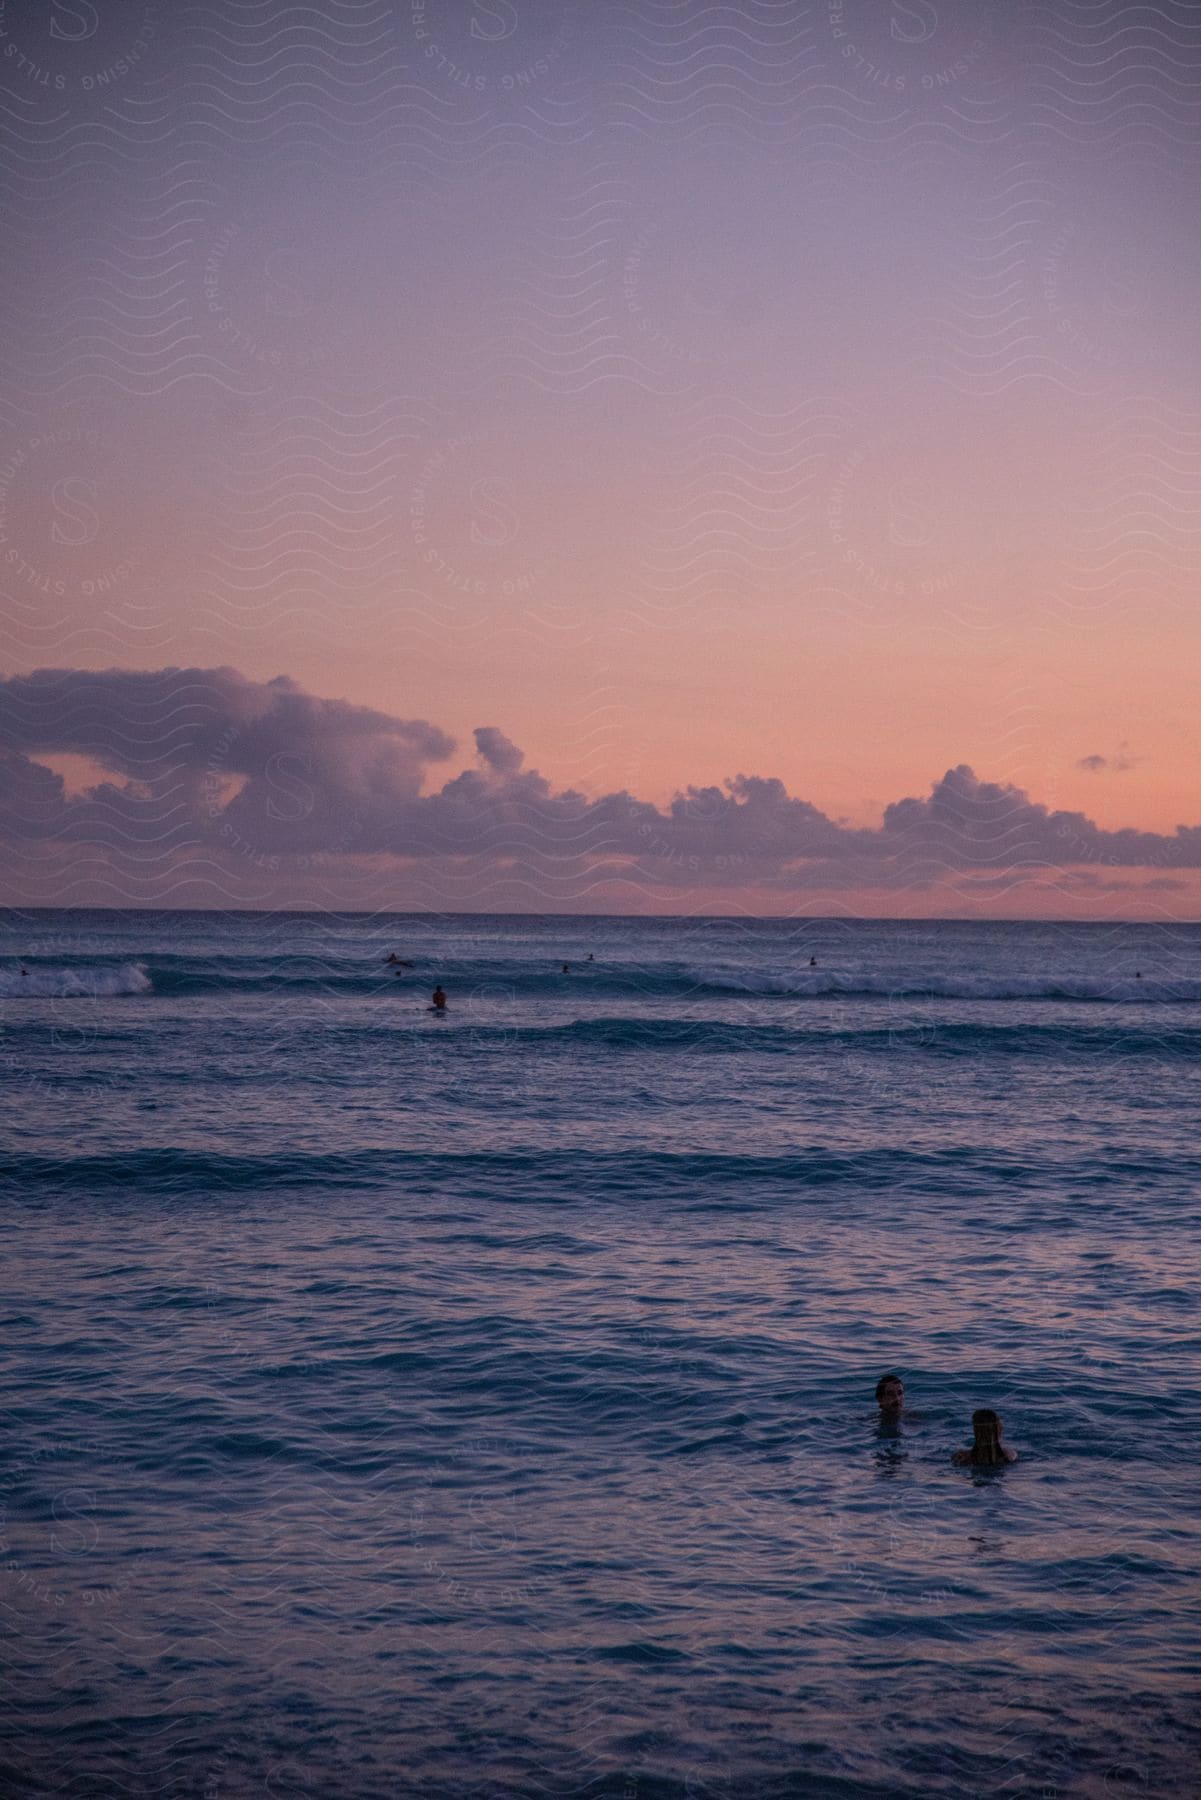 Panorama Of The Sea With People Bathing And A Purple Late Afternoon Sky